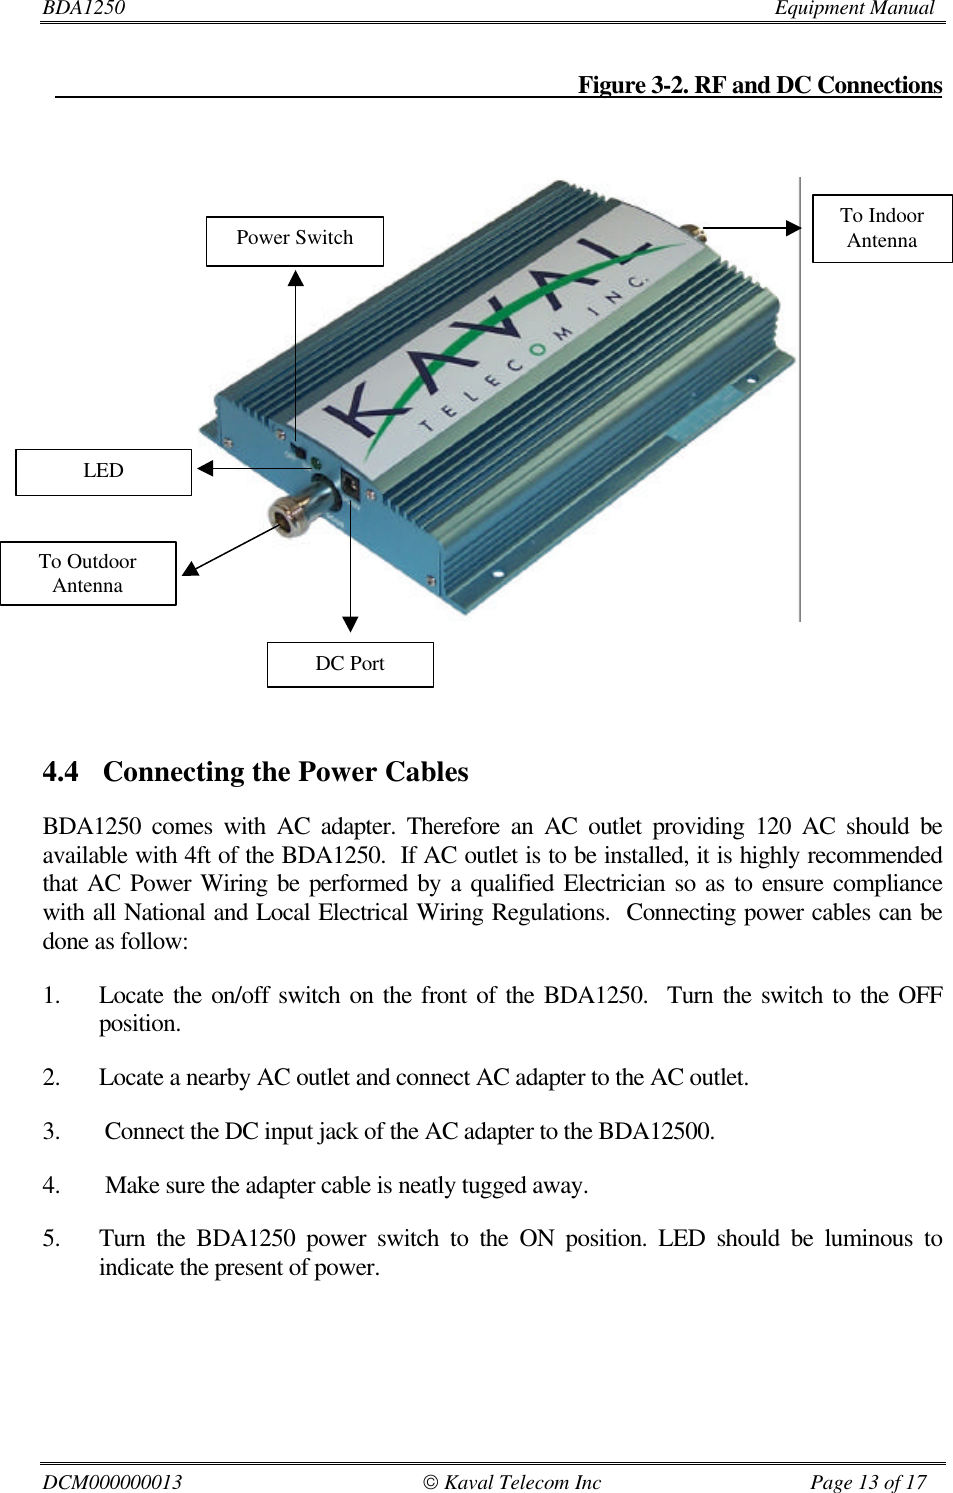 BDA1250                         Equipment ManualDCM000000013                                               Kaval Telecom Inc                                        Page 13 of 17                                                                                           Figure 3-2. RF and DC Connections4.4 Connecting the Power CablesBDA1250 comes with AC adapter. Therefore an AC outlet providing 120 AC should beavailable with 4ft of the BDA1250.  If AC outlet is to be installed, it is highly recommendedthat AC Power Wiring be performed by a qualified Electrician so as to ensure compliancewith all National and Local Electrical Wiring Regulations.  Connecting power cables can bedone as follow:1. Locate the on/off switch on the front of the BDA1250.  Turn the switch to the OFFposition.2. Locate a nearby AC outlet and connect AC adapter to the AC outlet.3.  Connect the DC input jack of the AC adapter to the BDA12500.4.  Make sure the adapter cable is neatly tugged away.5. Turn the BDA1250 power switch to the ON position. LED should be luminous toindicate the present of power.To OutdoorAntennaPower SwitchLEDDC PortTo IndoorAntenna